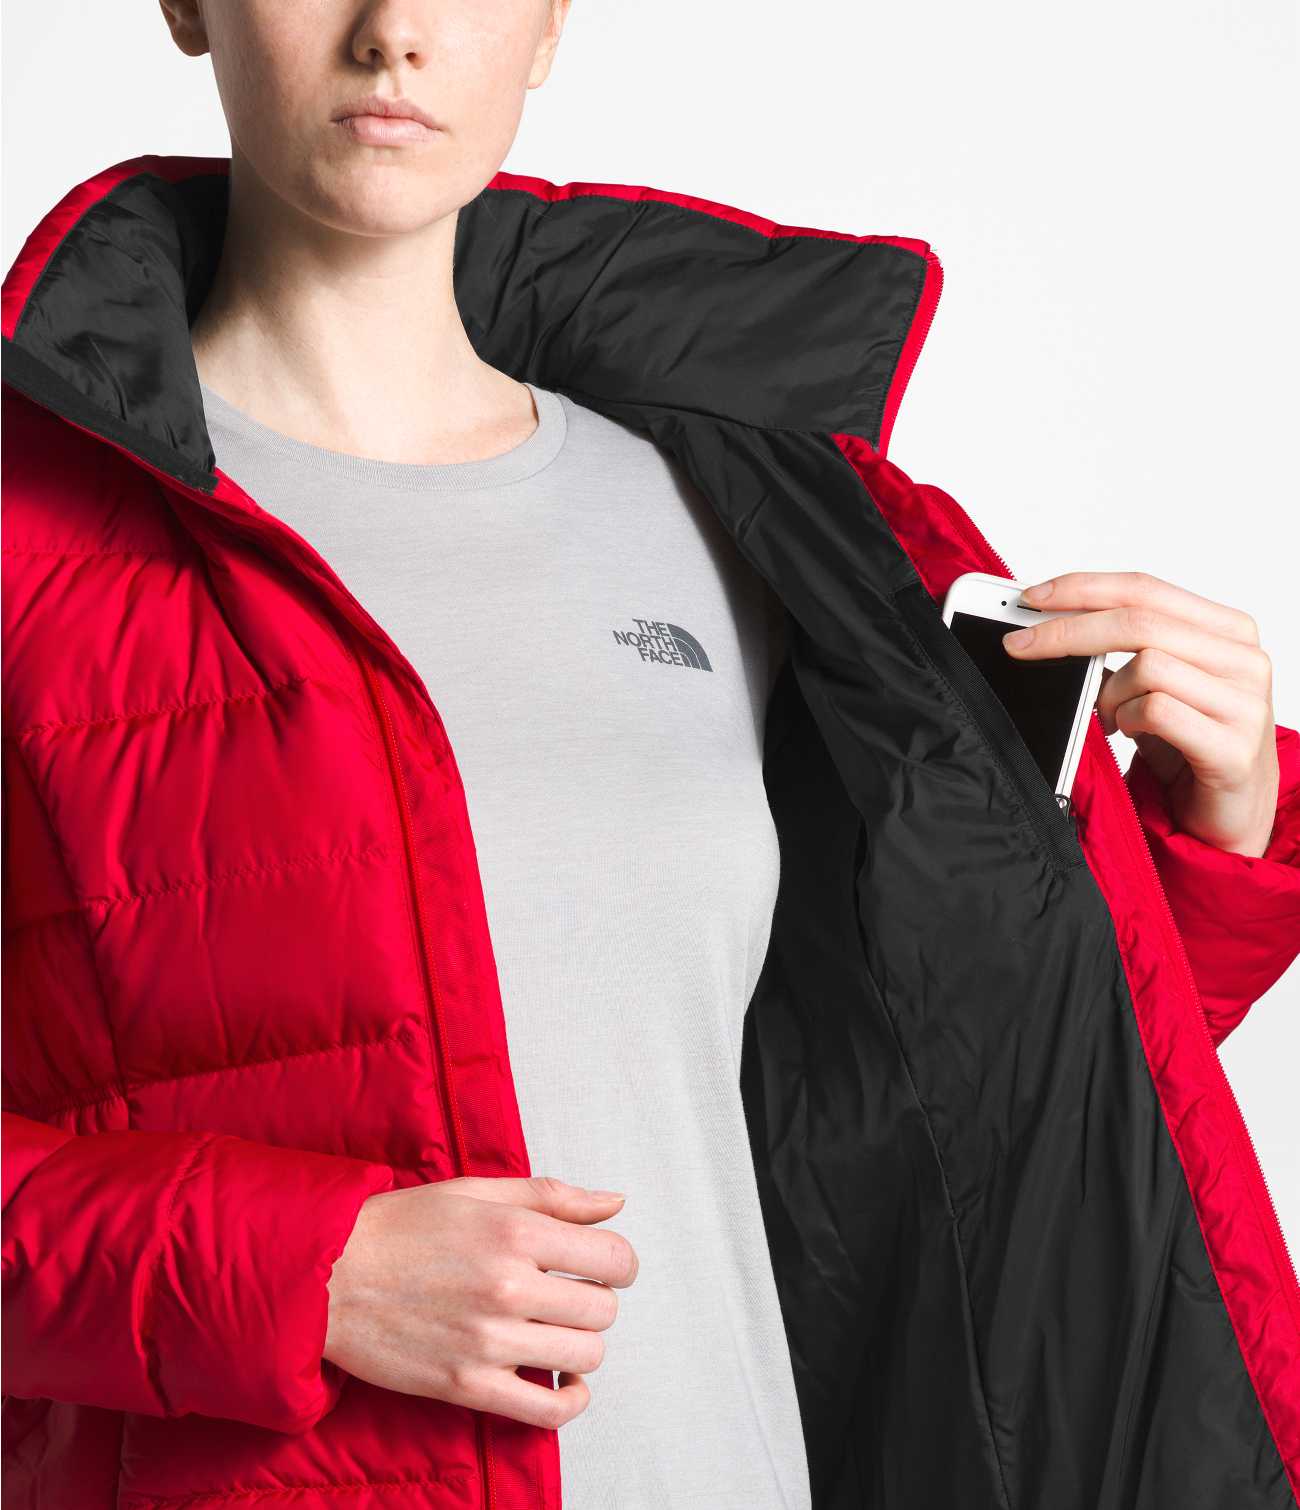 https://images.thenorthface.com/is/image/TheNorthFace/NF0A35BW_682_detail2?wid=1300&hei=1510&fmt=jpeg&qlt=50&resMode=sharp